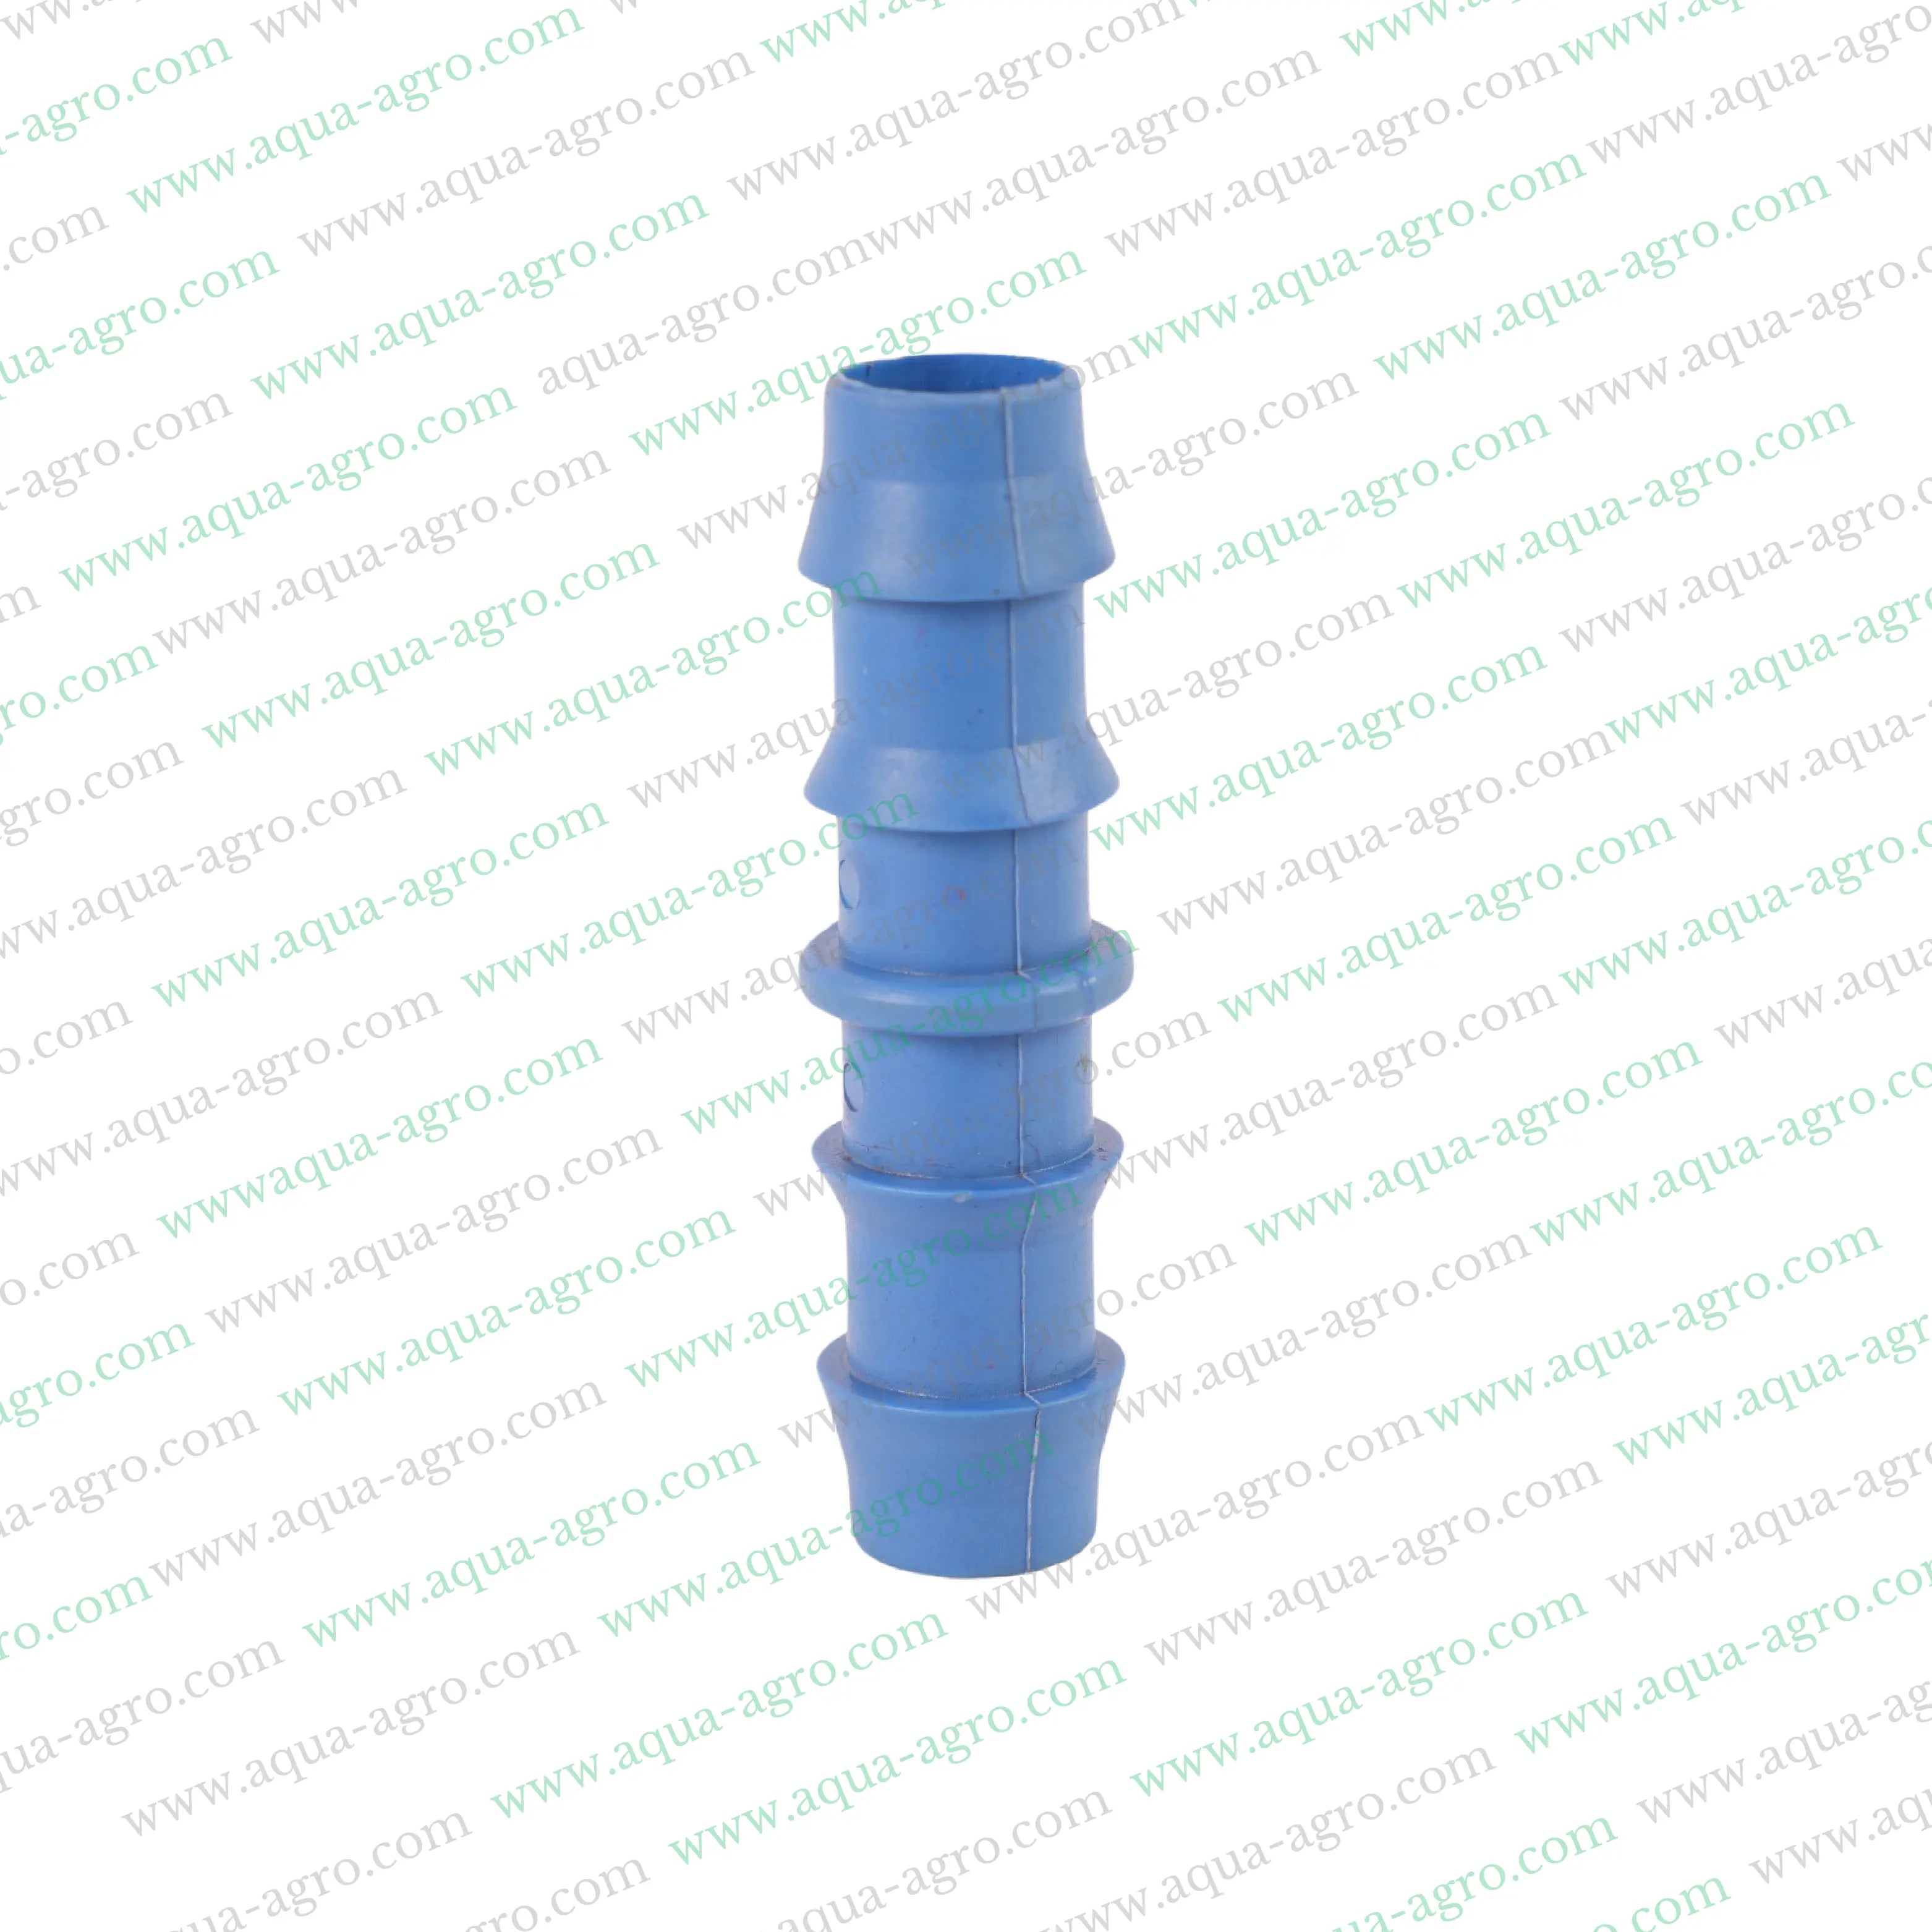 AQUA - AGRO | Drip Fittings And Accessories - Barbed Fittings - Lite - coupler/Joiner - 16mm